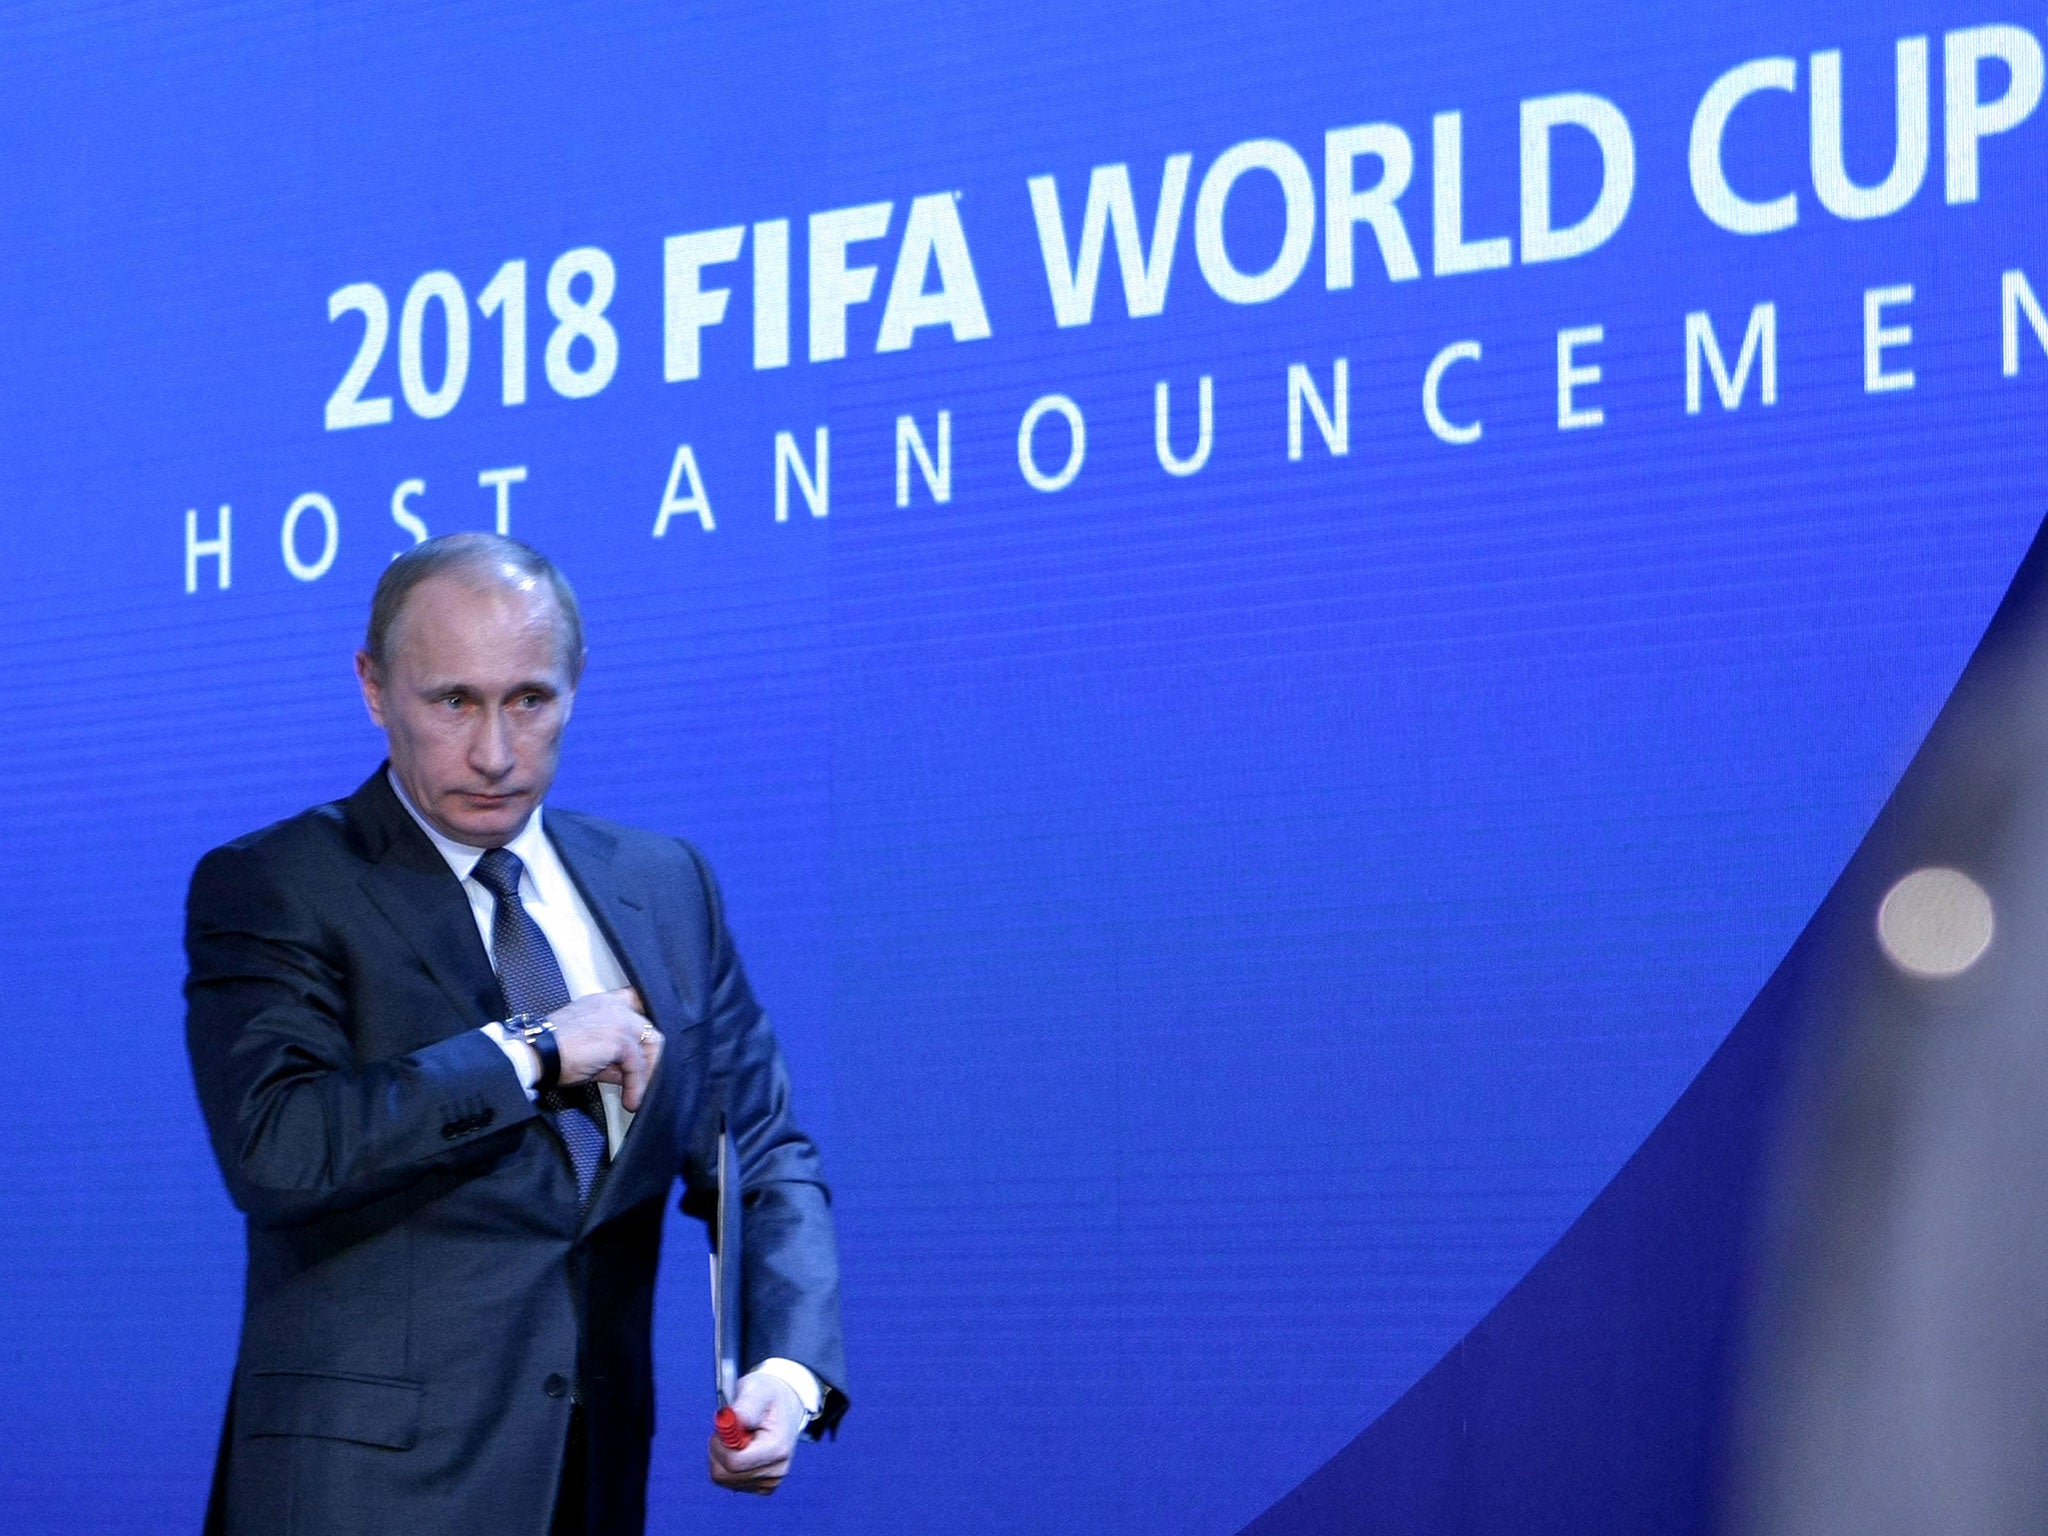 Russia will host the World Cup across 12 different stadiums in 11 different cities